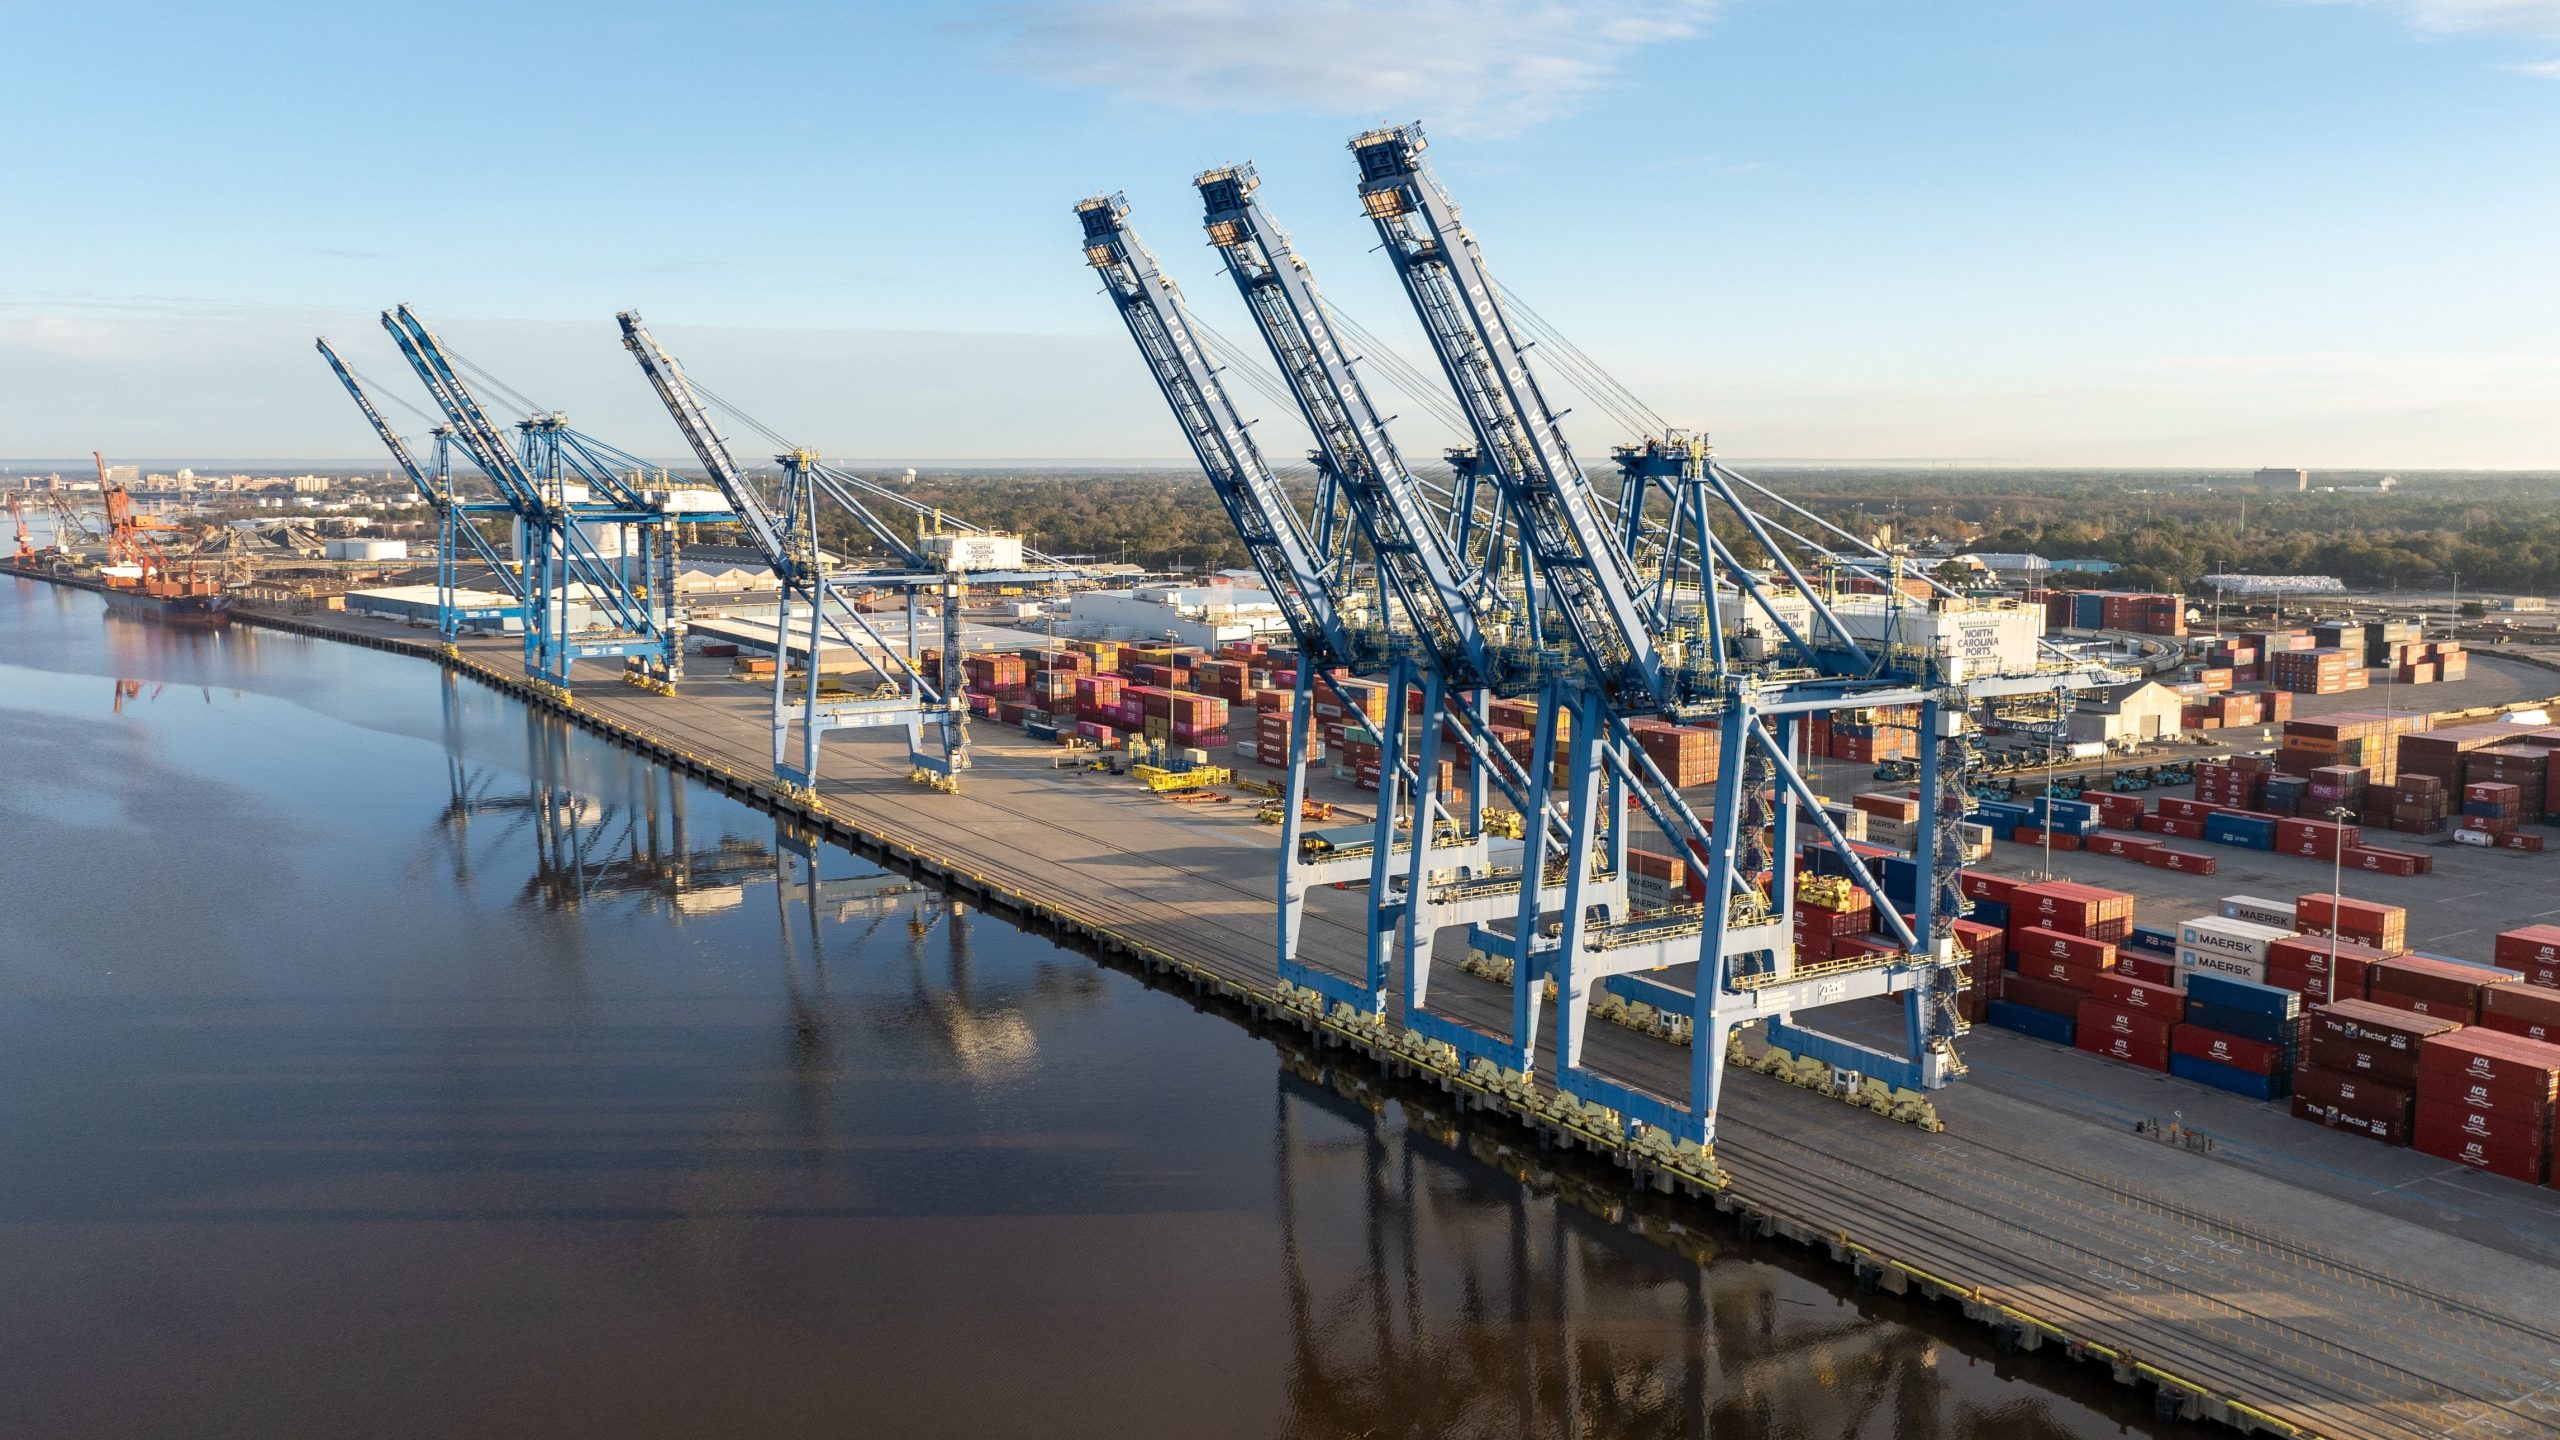  Delaware partners with Enstructure on US$635M Edgemoor terminal ‣ WorldCargo News 